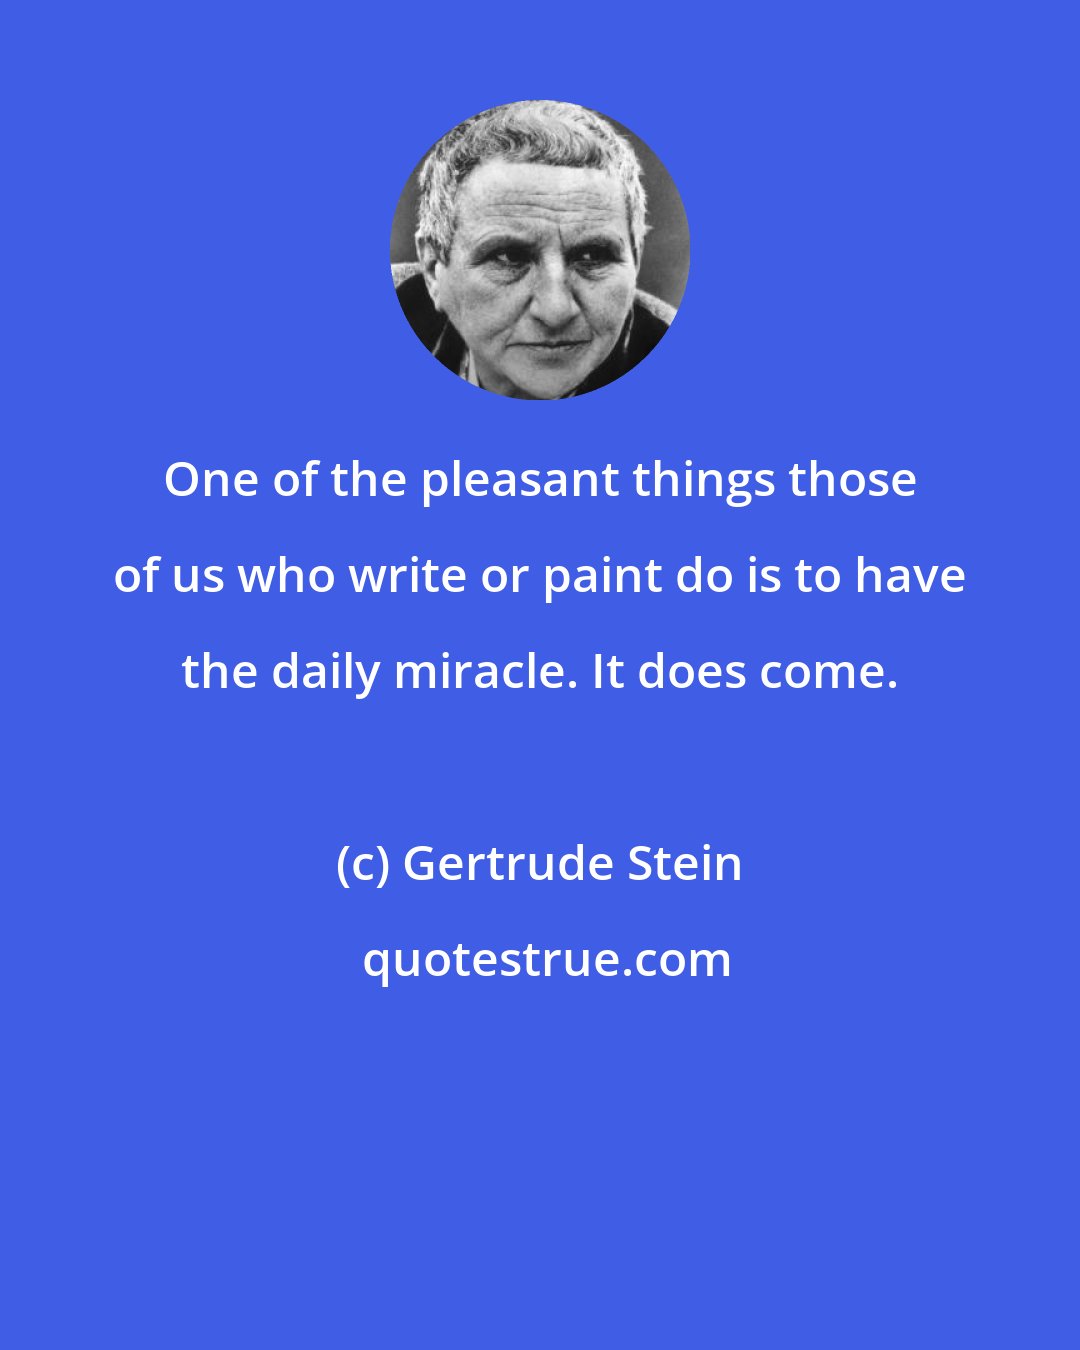 Gertrude Stein: One of the pleasant things those of us who write or paint do is to have the daily miracle. It does come.